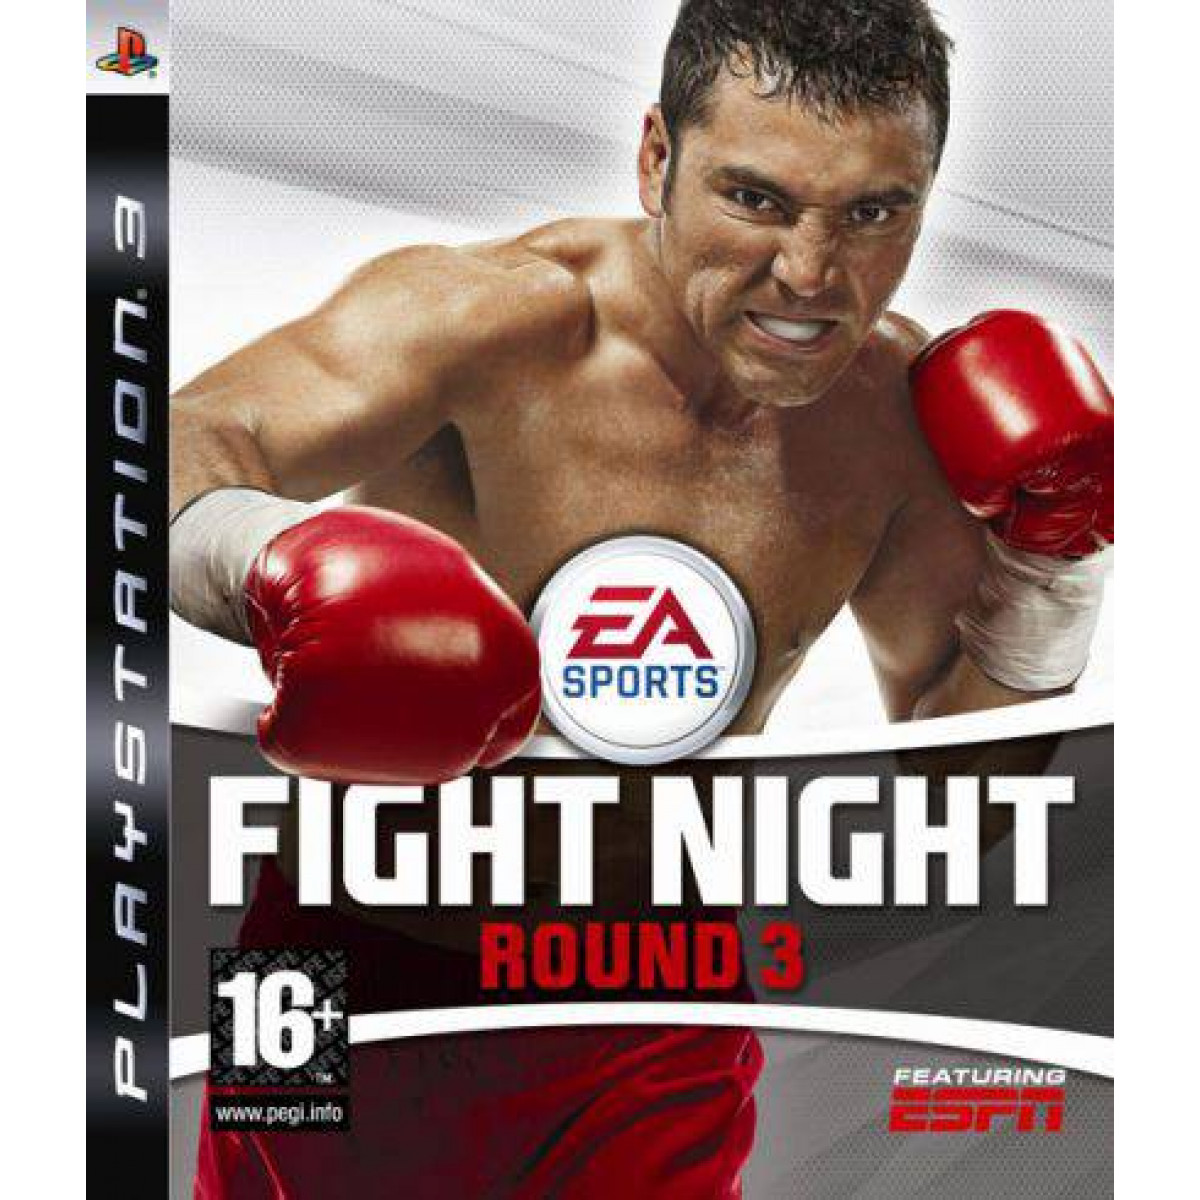 Ps3 boxing. Fight Night Round 4 ps3 обложка. Fight Night Round 4 (ps3). Fight Night Round 3 ps2. Fight Night Round 3 диск ПС 2.